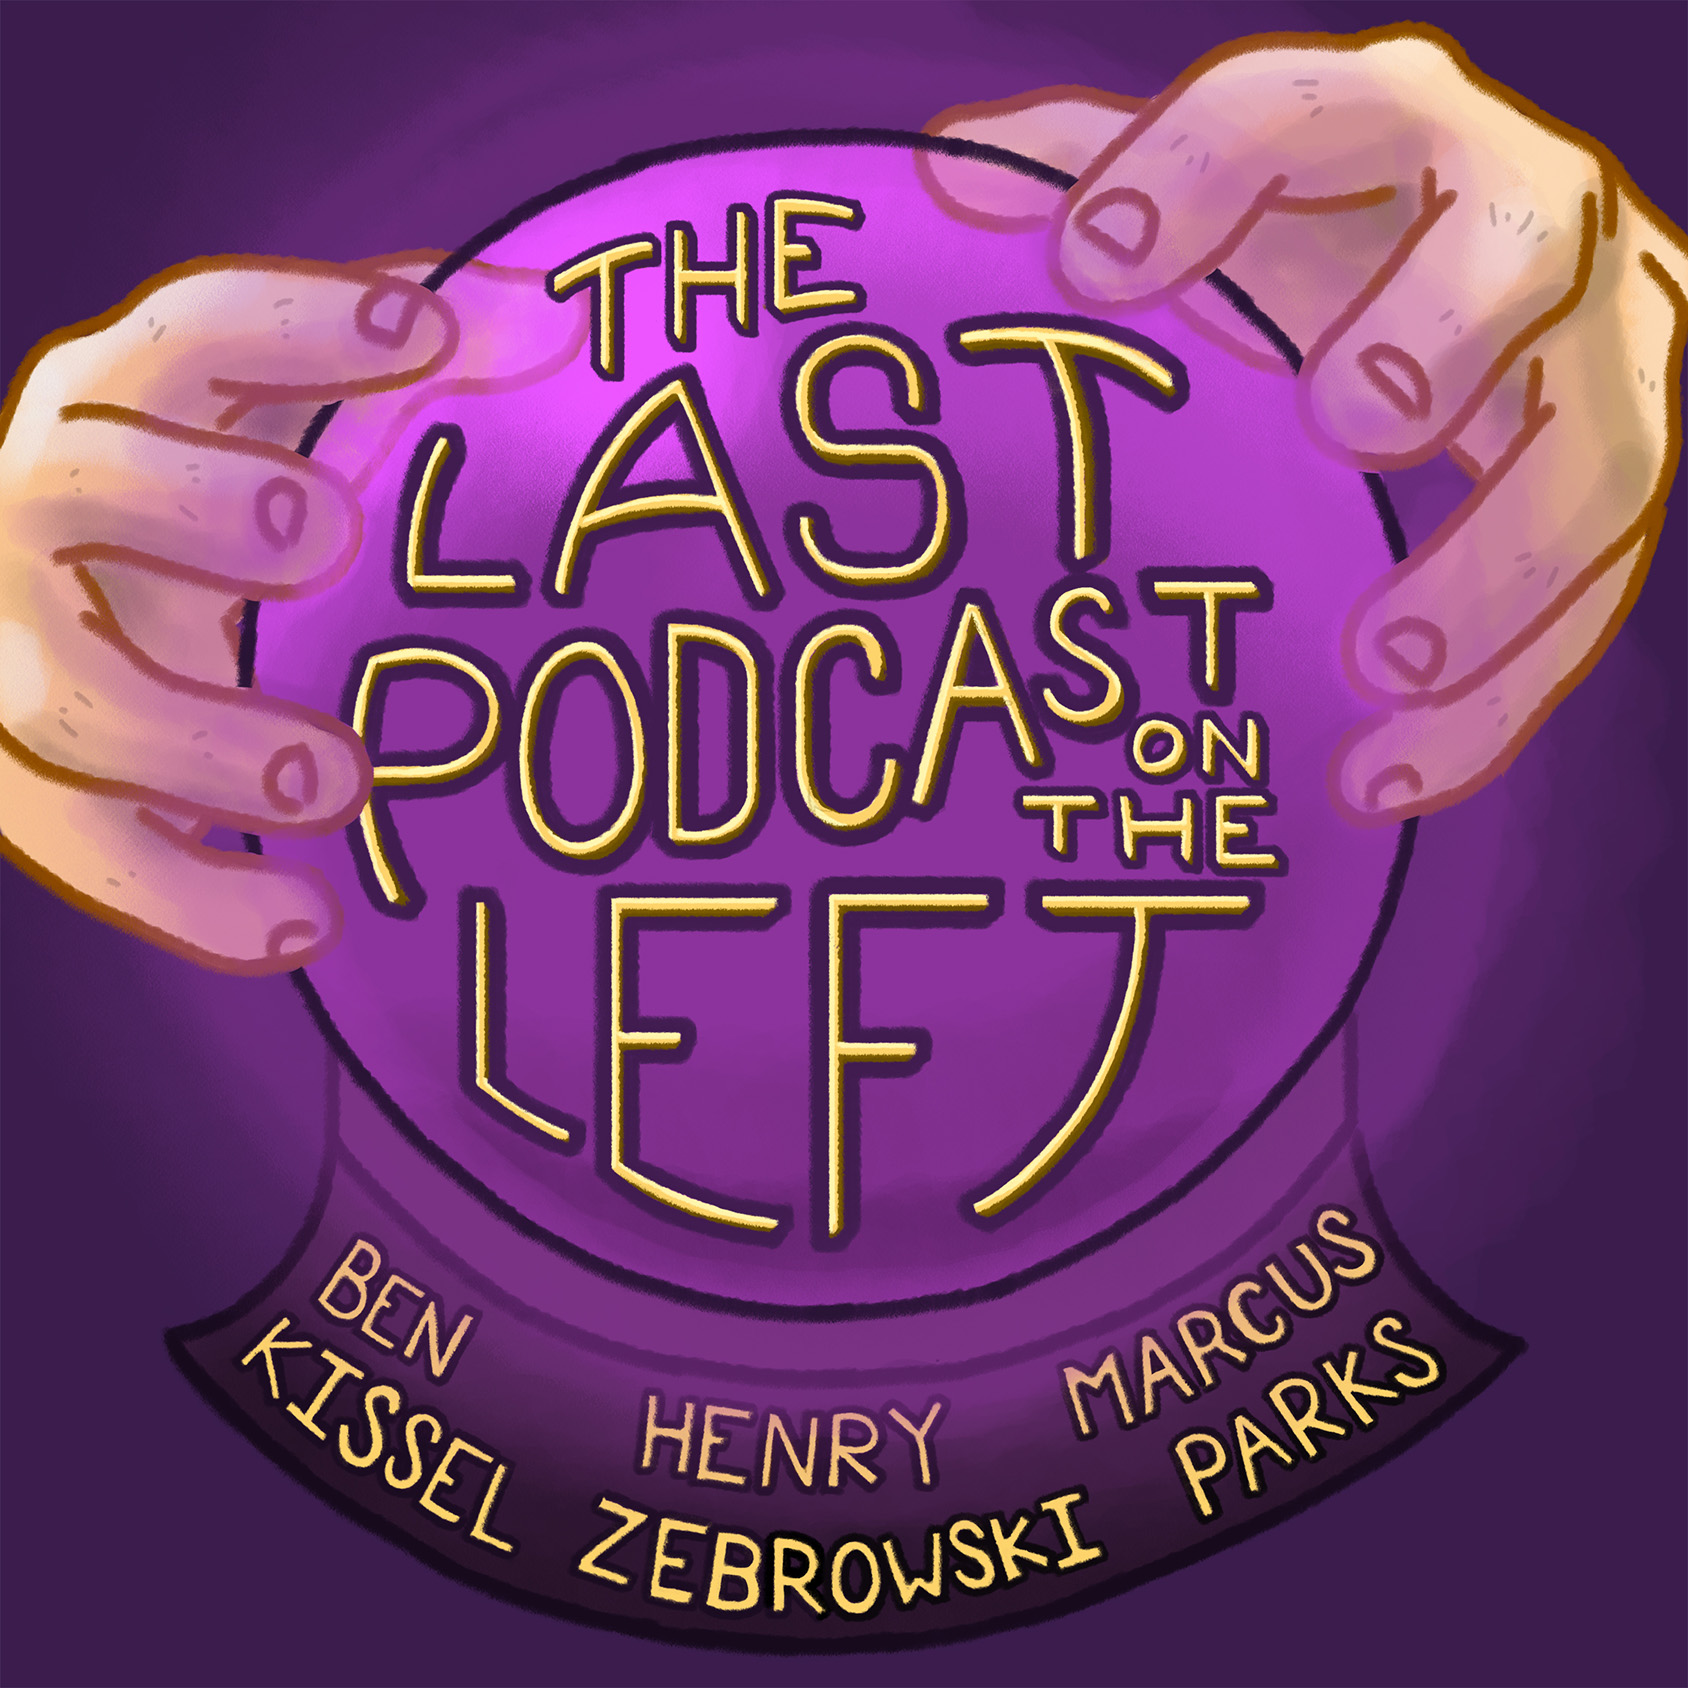 Podcast cover for 'The Last Podcast on the left'. Illustration of a purple crystal ball with cands around it, title is inside the ball and podcast host's names are on the base.